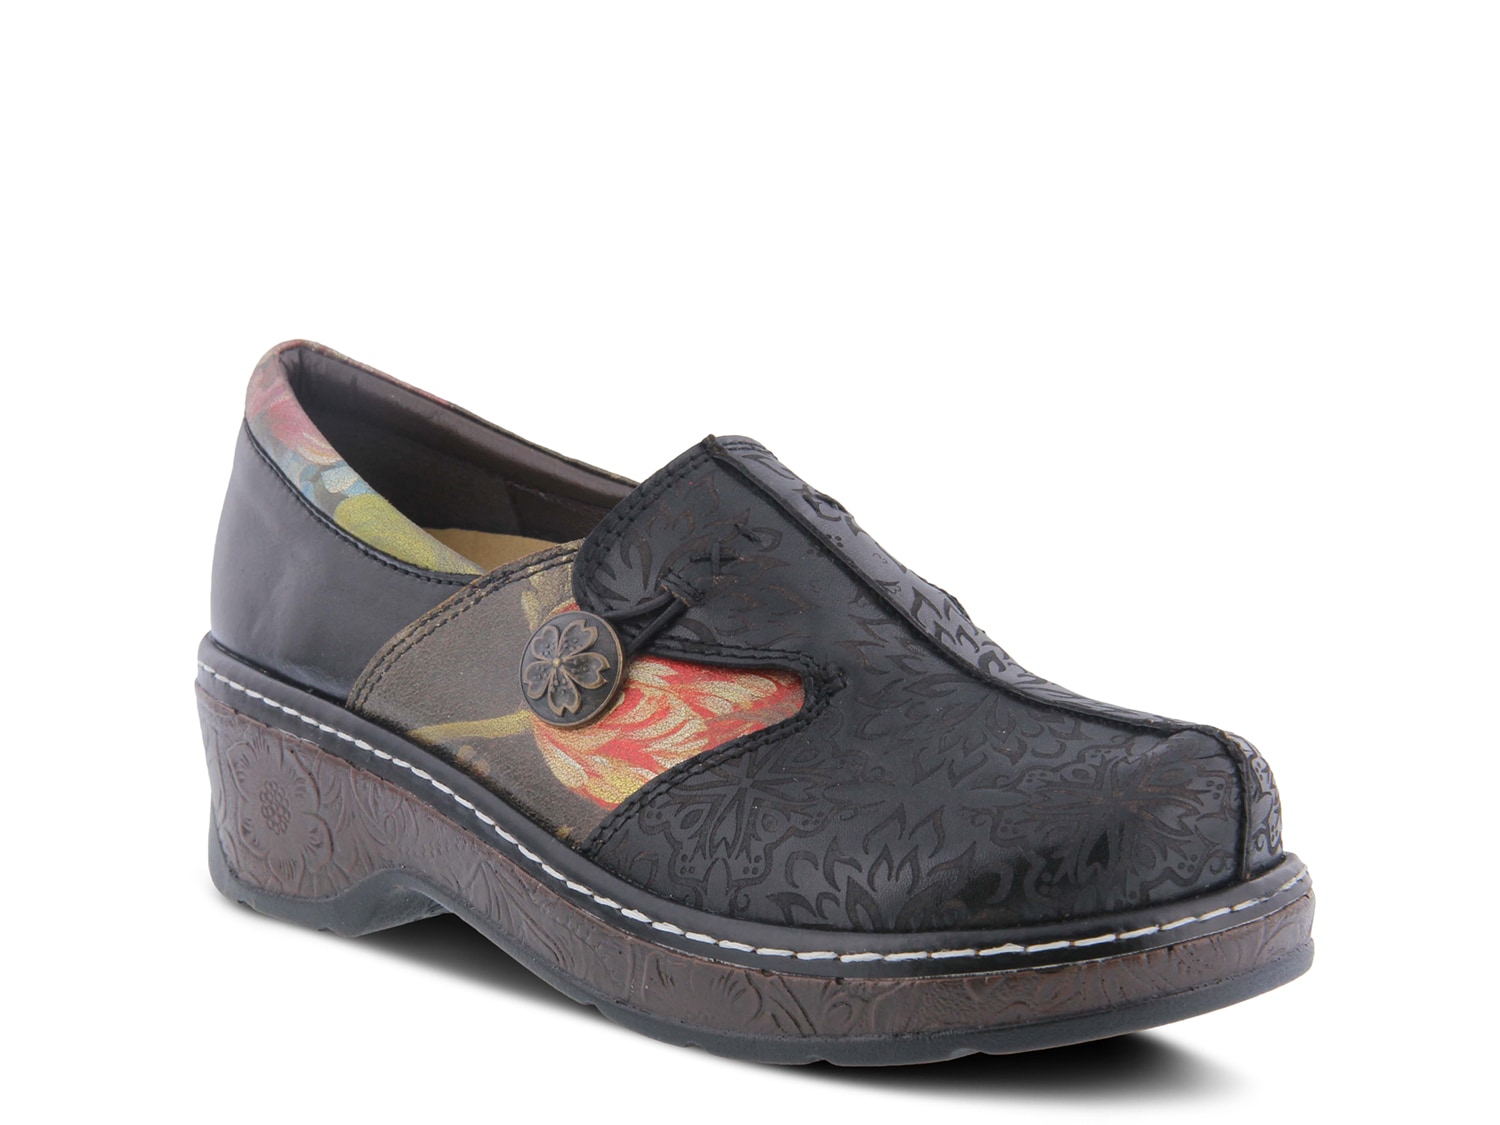 L'Artiste by Spring Step Flames Clog - Free Shipping | DSW